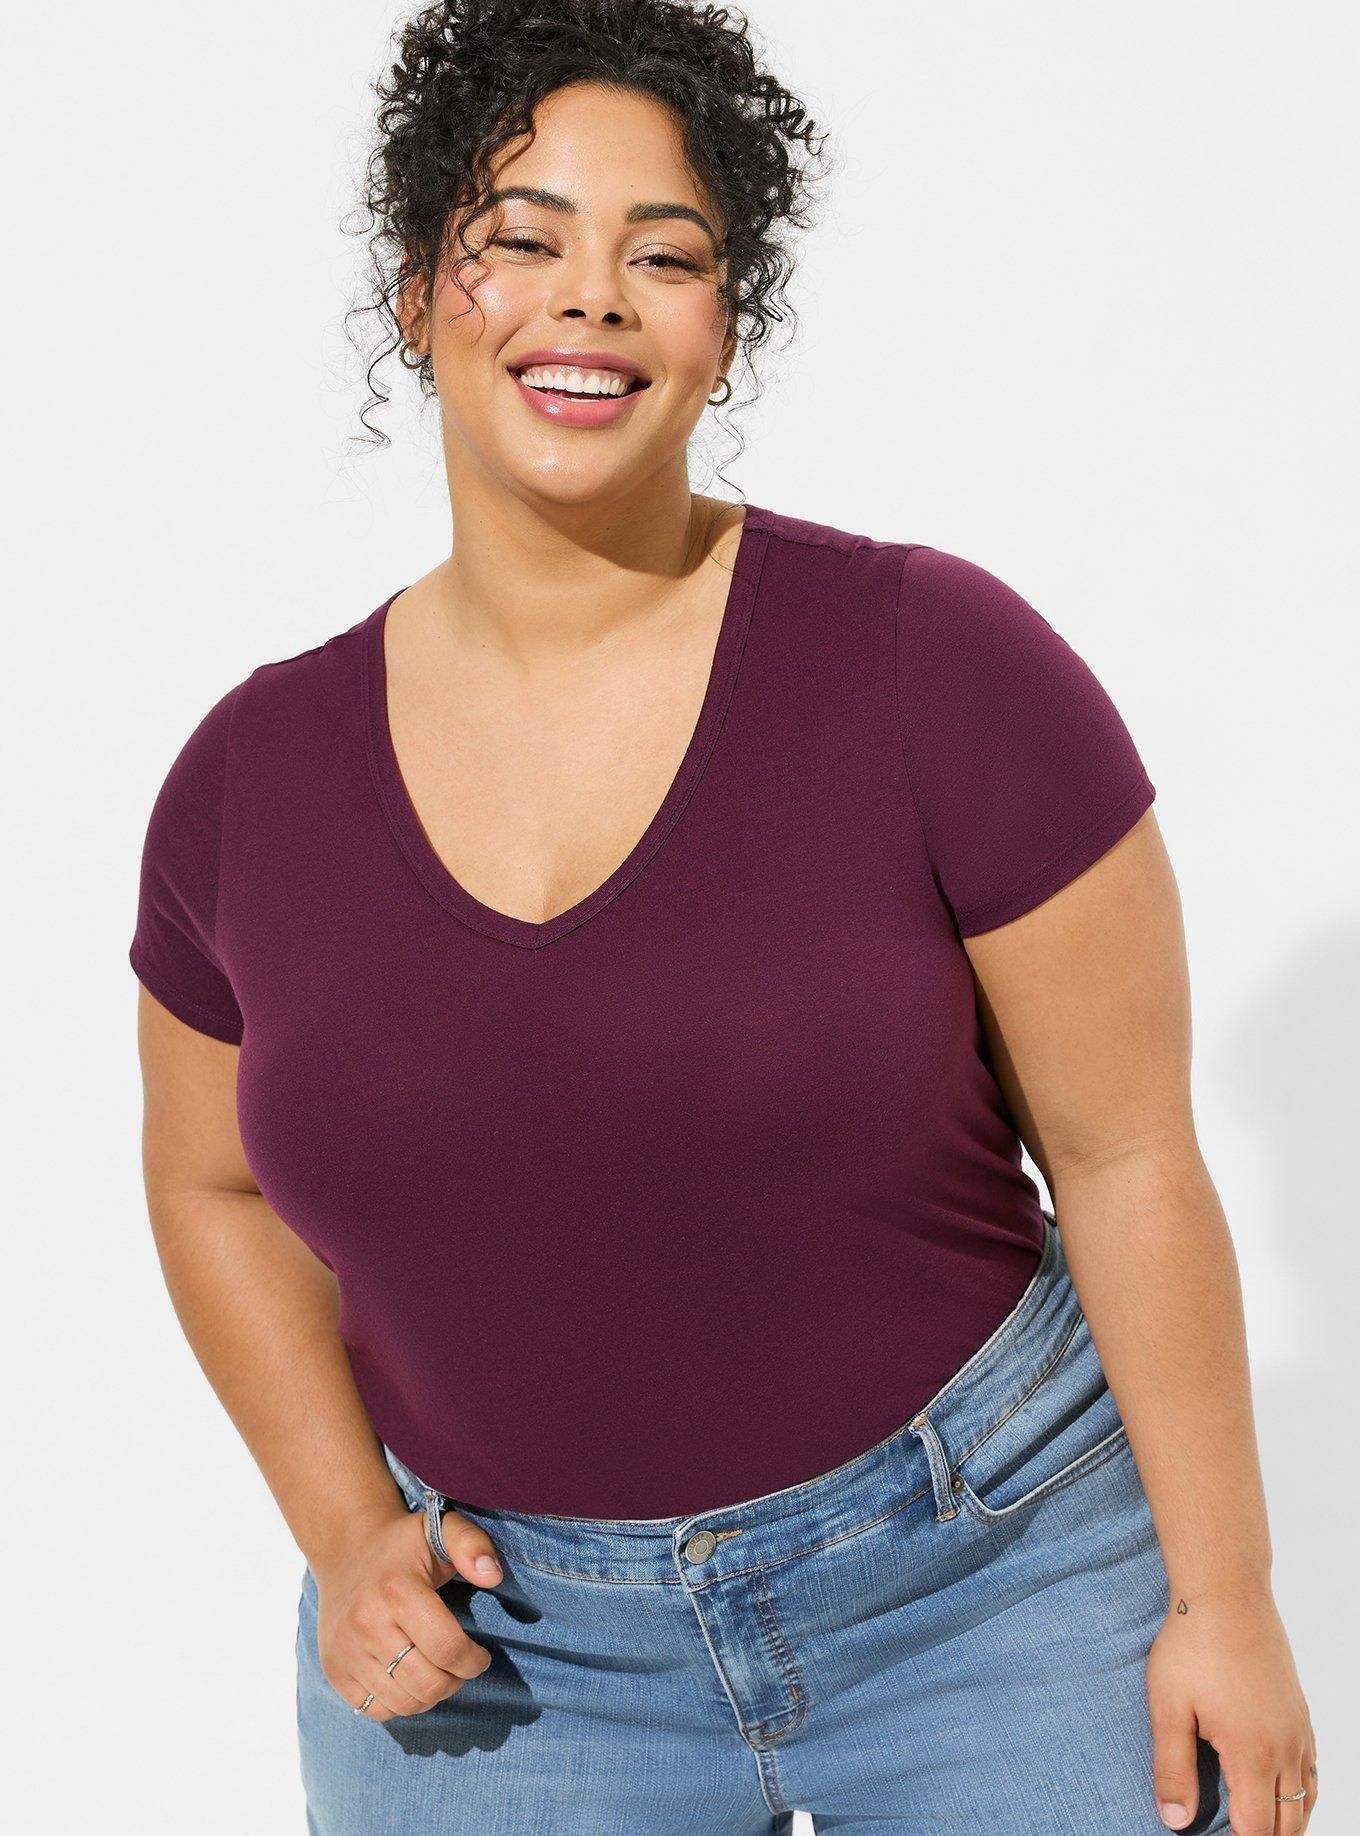 SHOWMALL Plus Size Clothes for Women Cold Shoulder Top Burgundy 4X Blouse  Short Sleeve Clothing V Neck Tunic Summer Shirts 